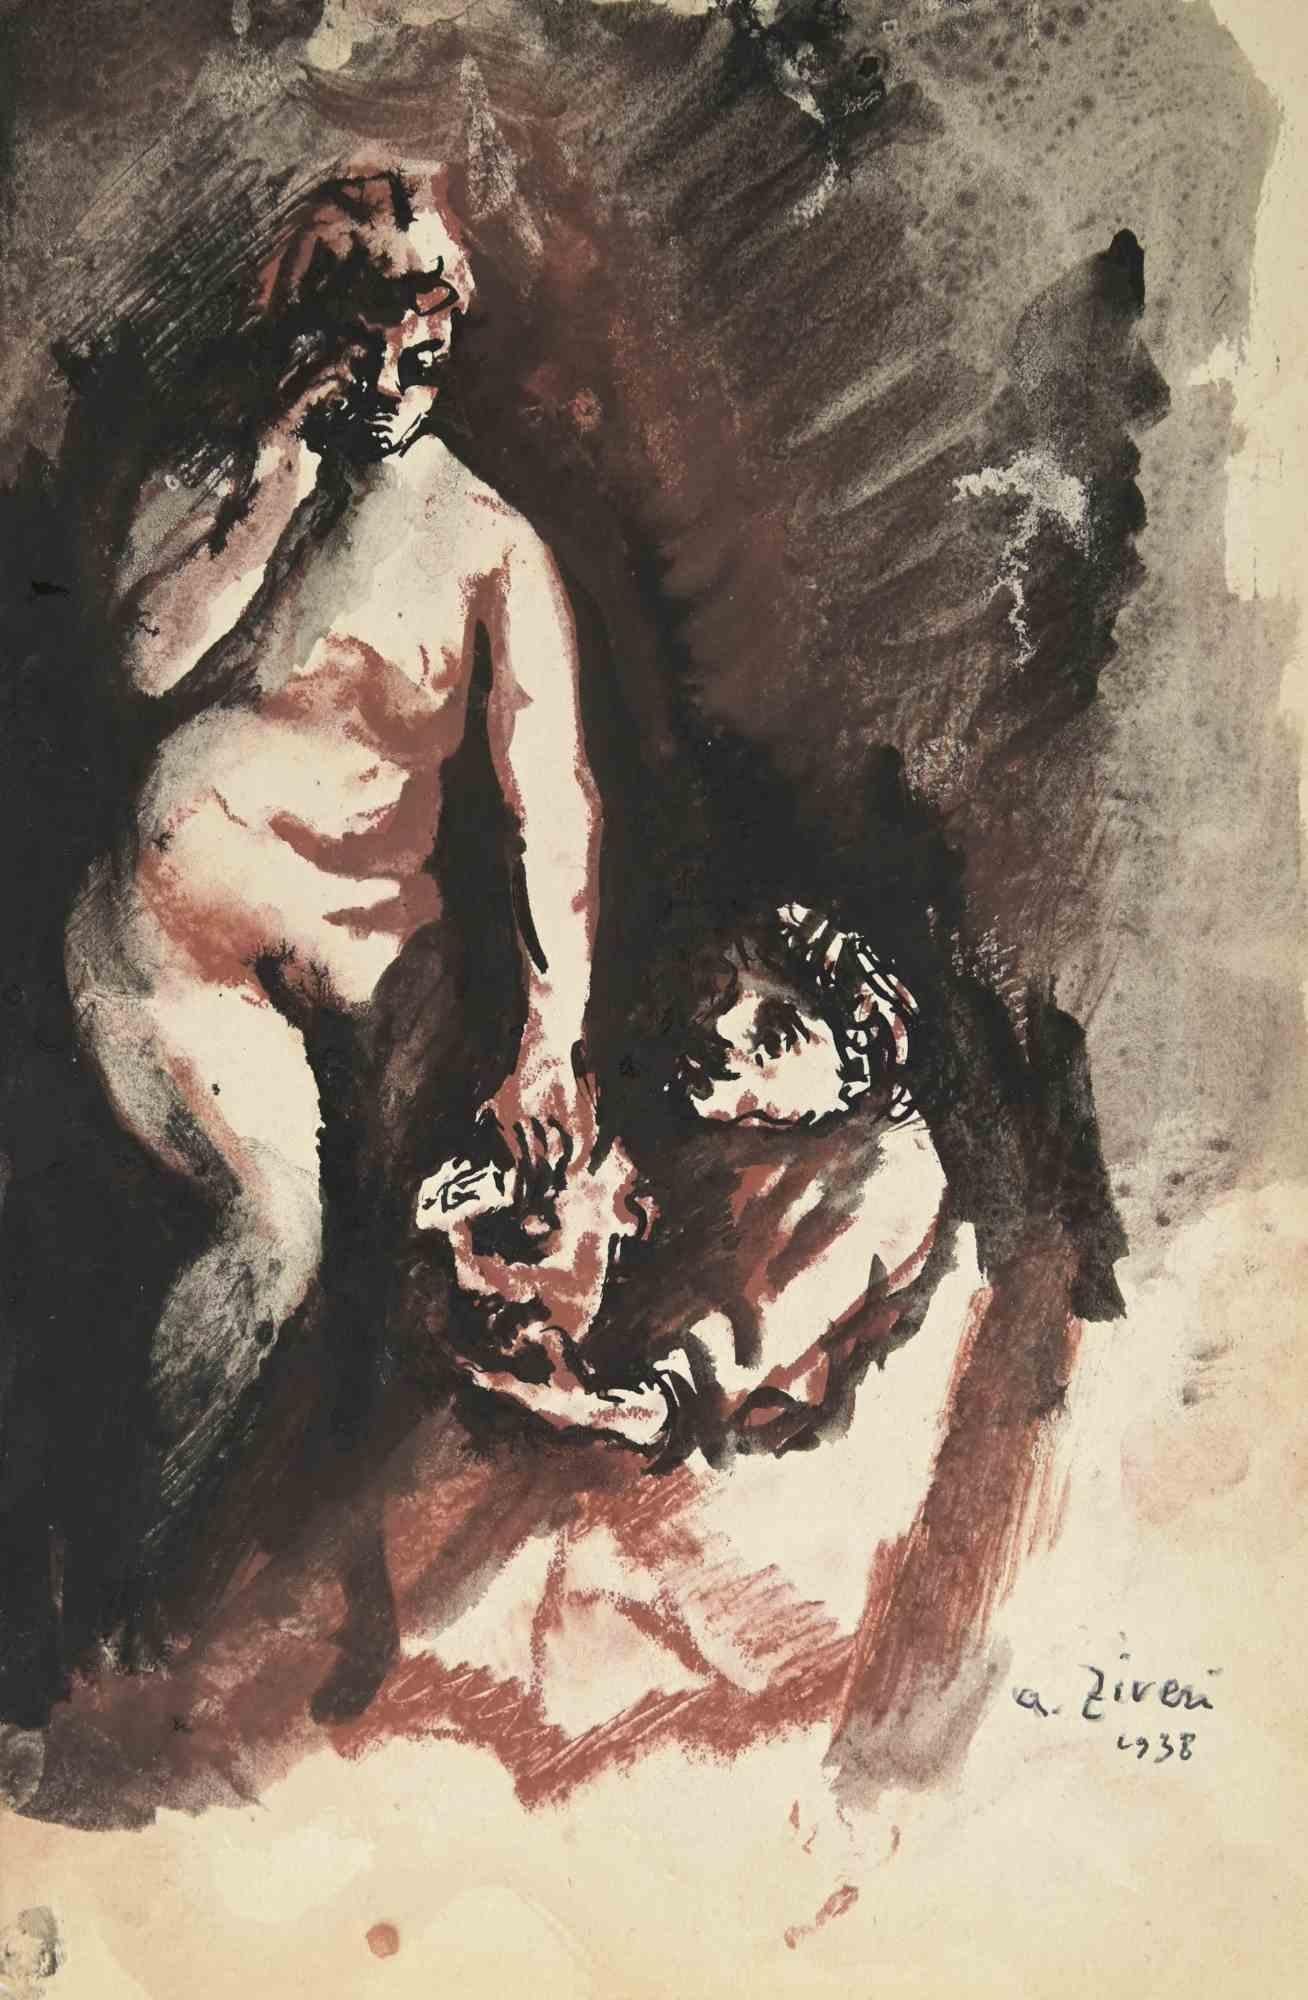 Lovers is a drawing realized by Alberto Ziveri in 1938.

Watercolor on paper.

Hand-signed and dated.

In good conditions.

The artwork is represented through deft strokes masterly.

Alberto Ziveri (Rome,1908 – 1990), the Italian painter of the